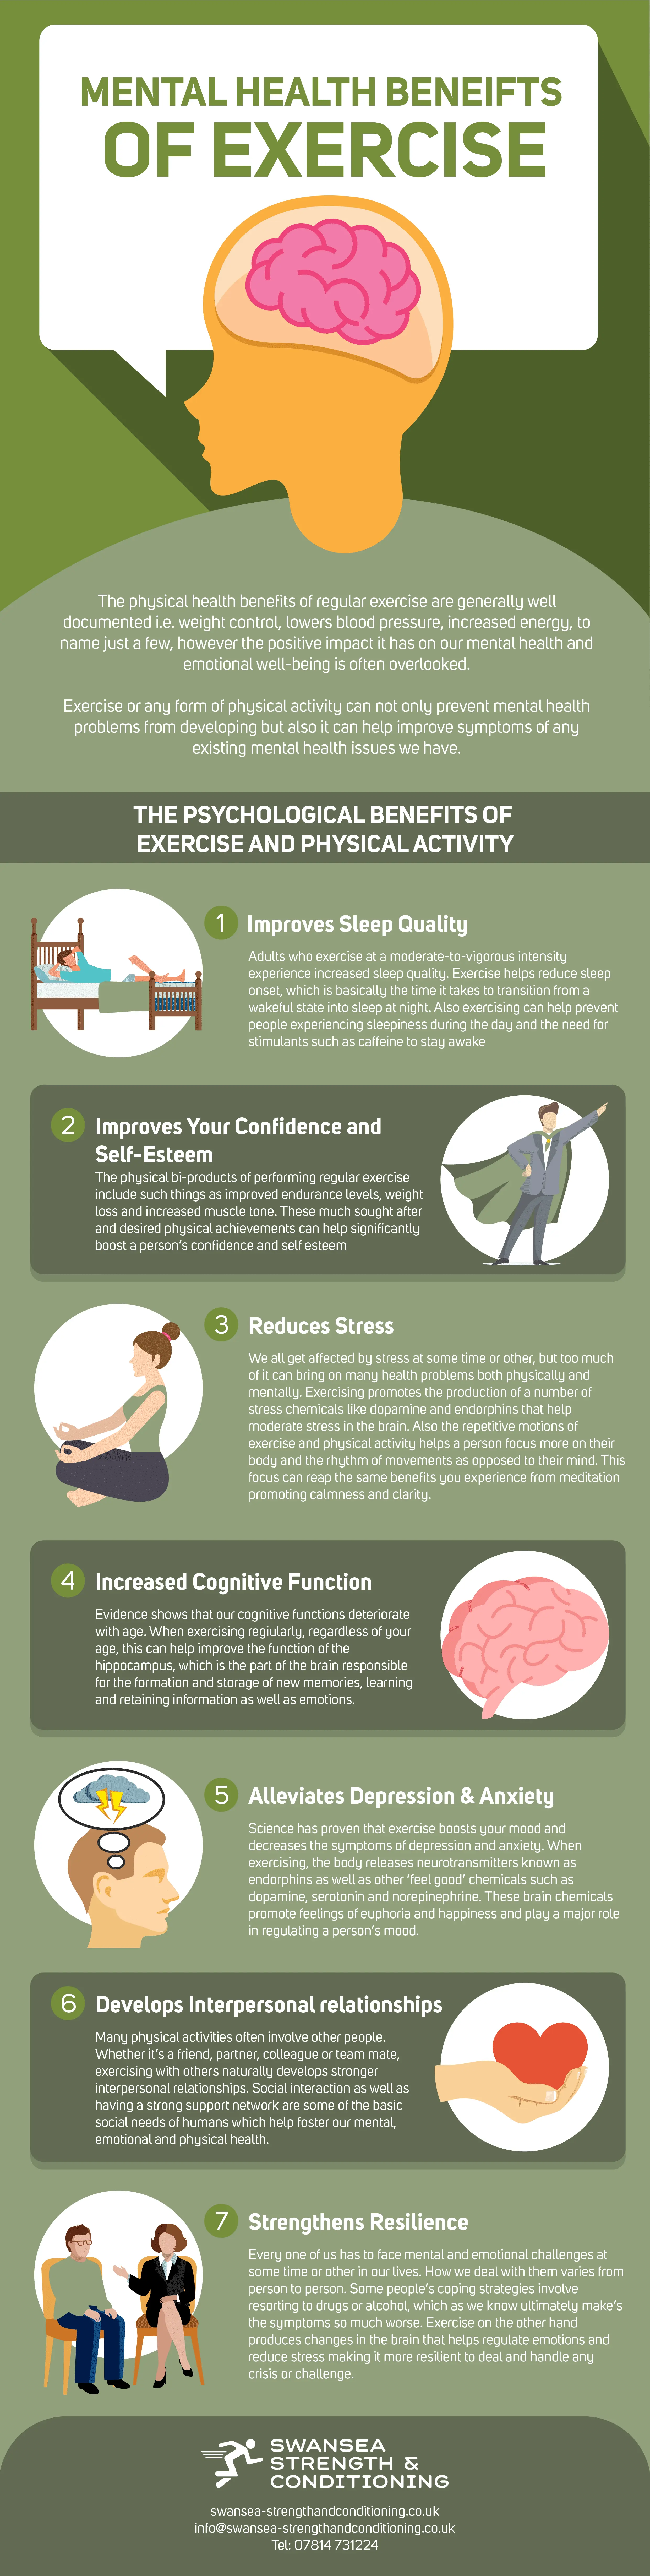 nfographic laying out mental health benefits of regular exercise and physical activity